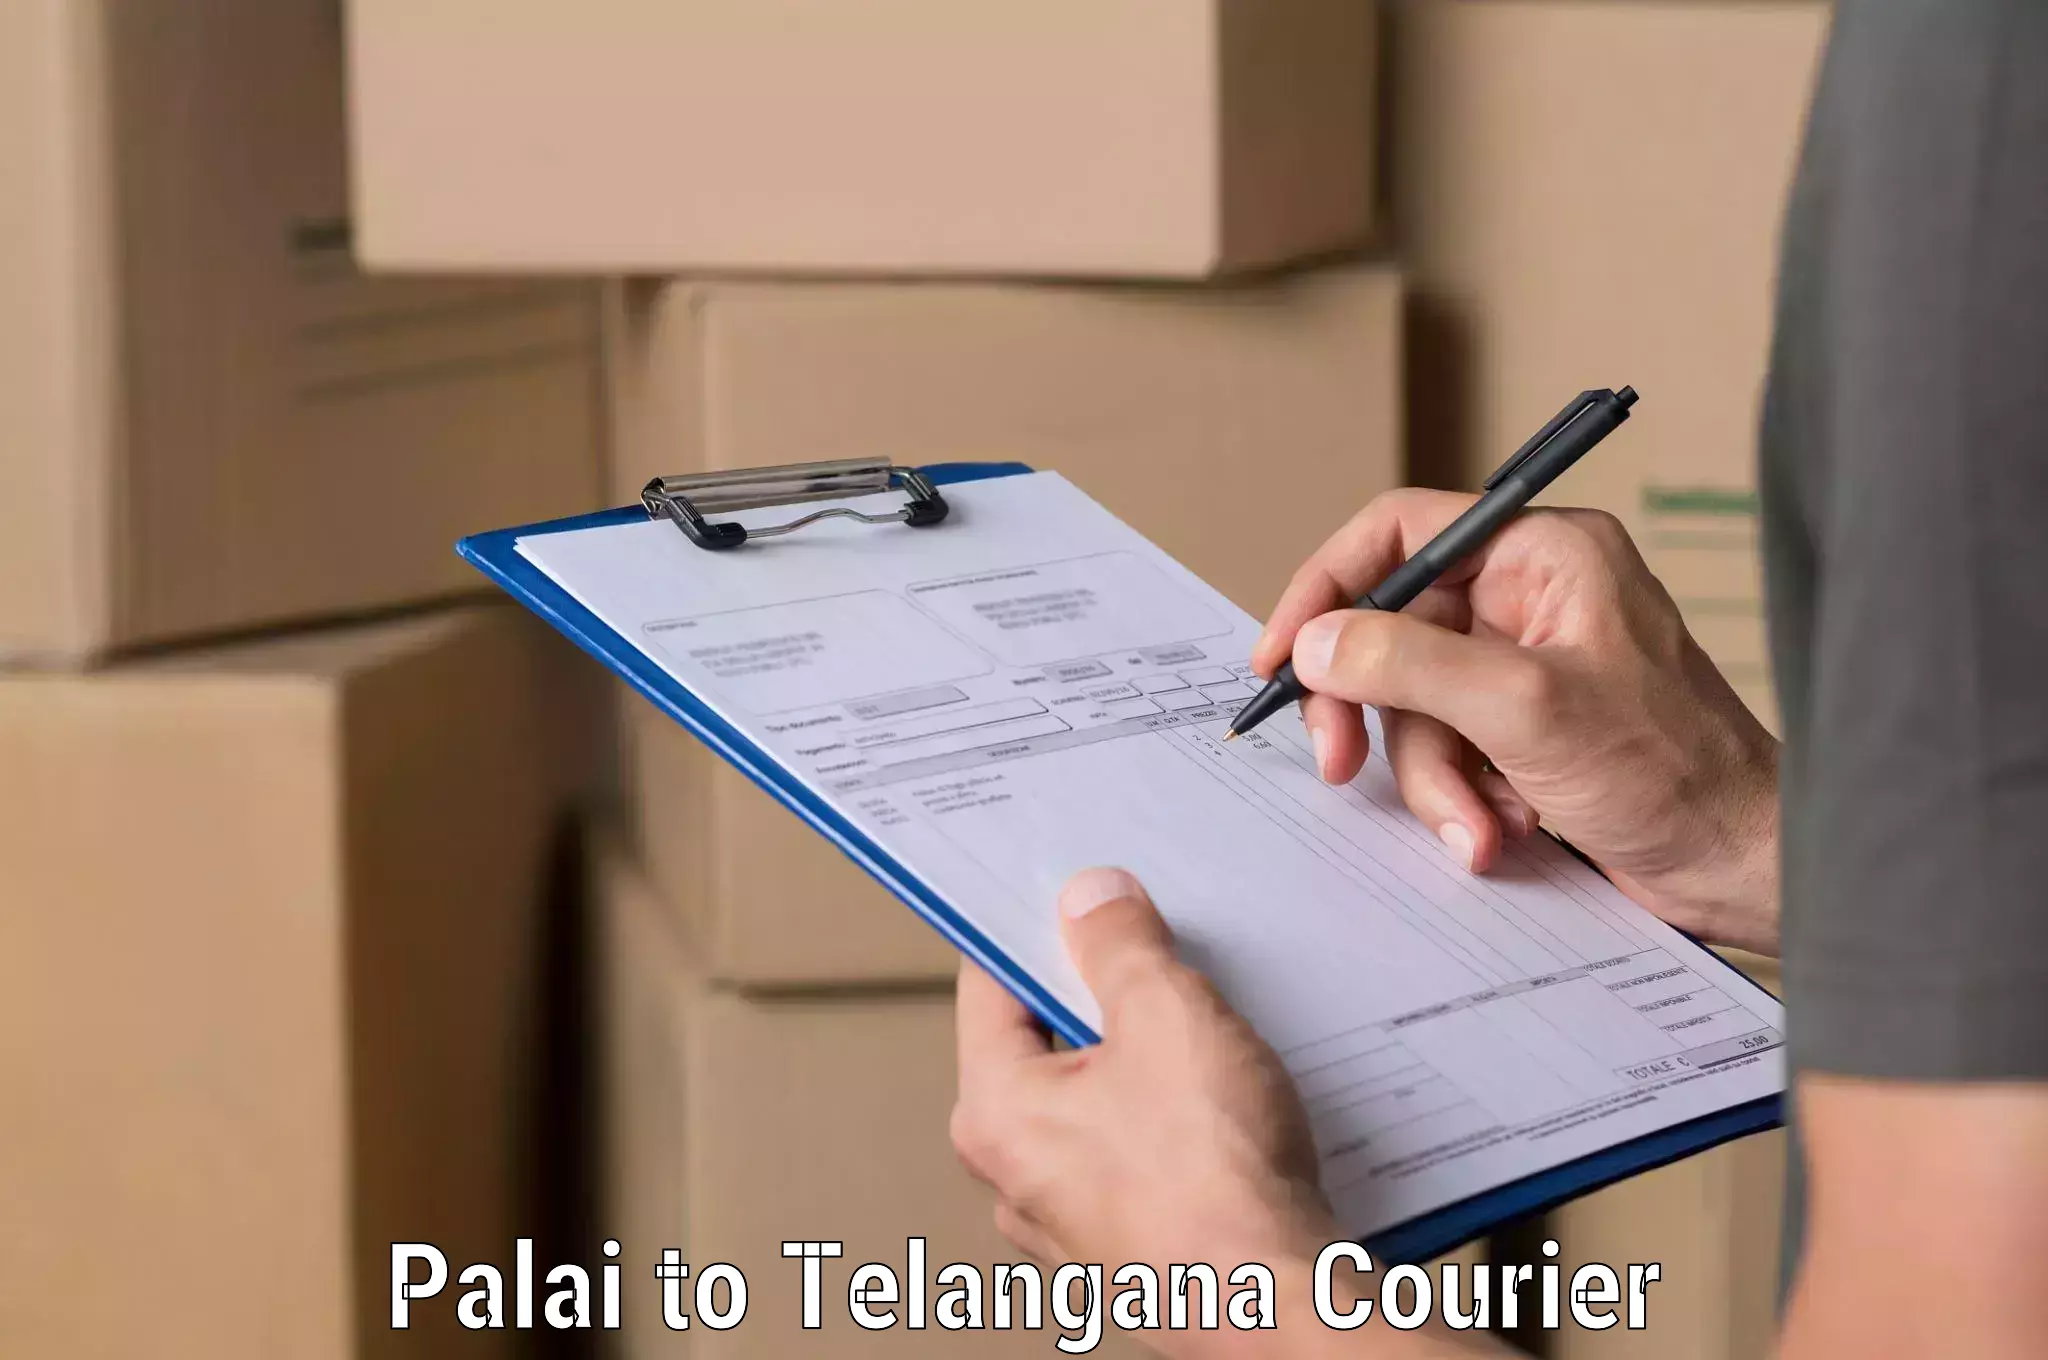 Parcel delivery automation Palai to Telangana